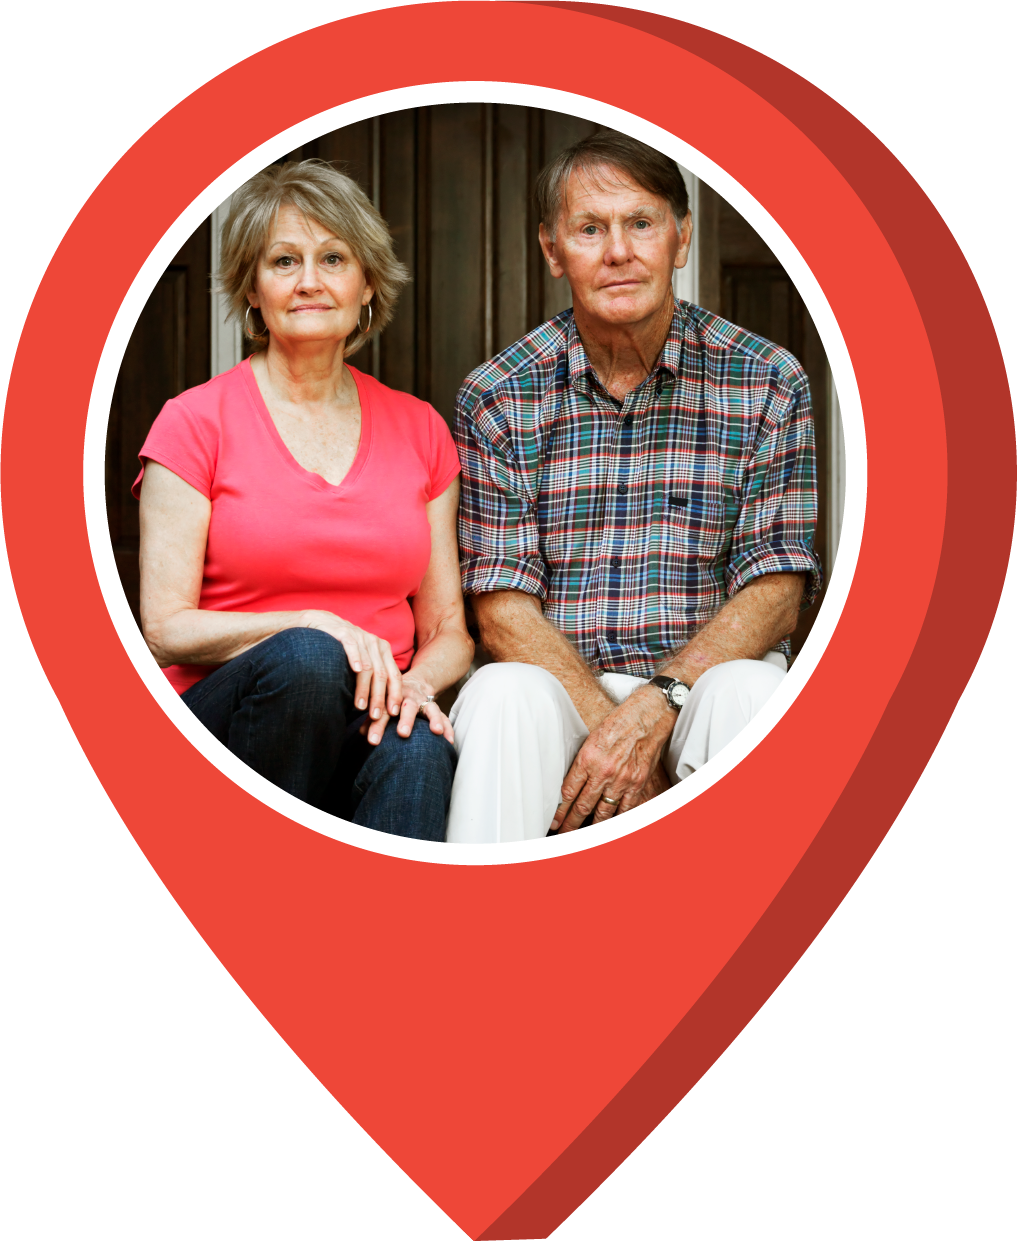 map pin with image of a man and woman